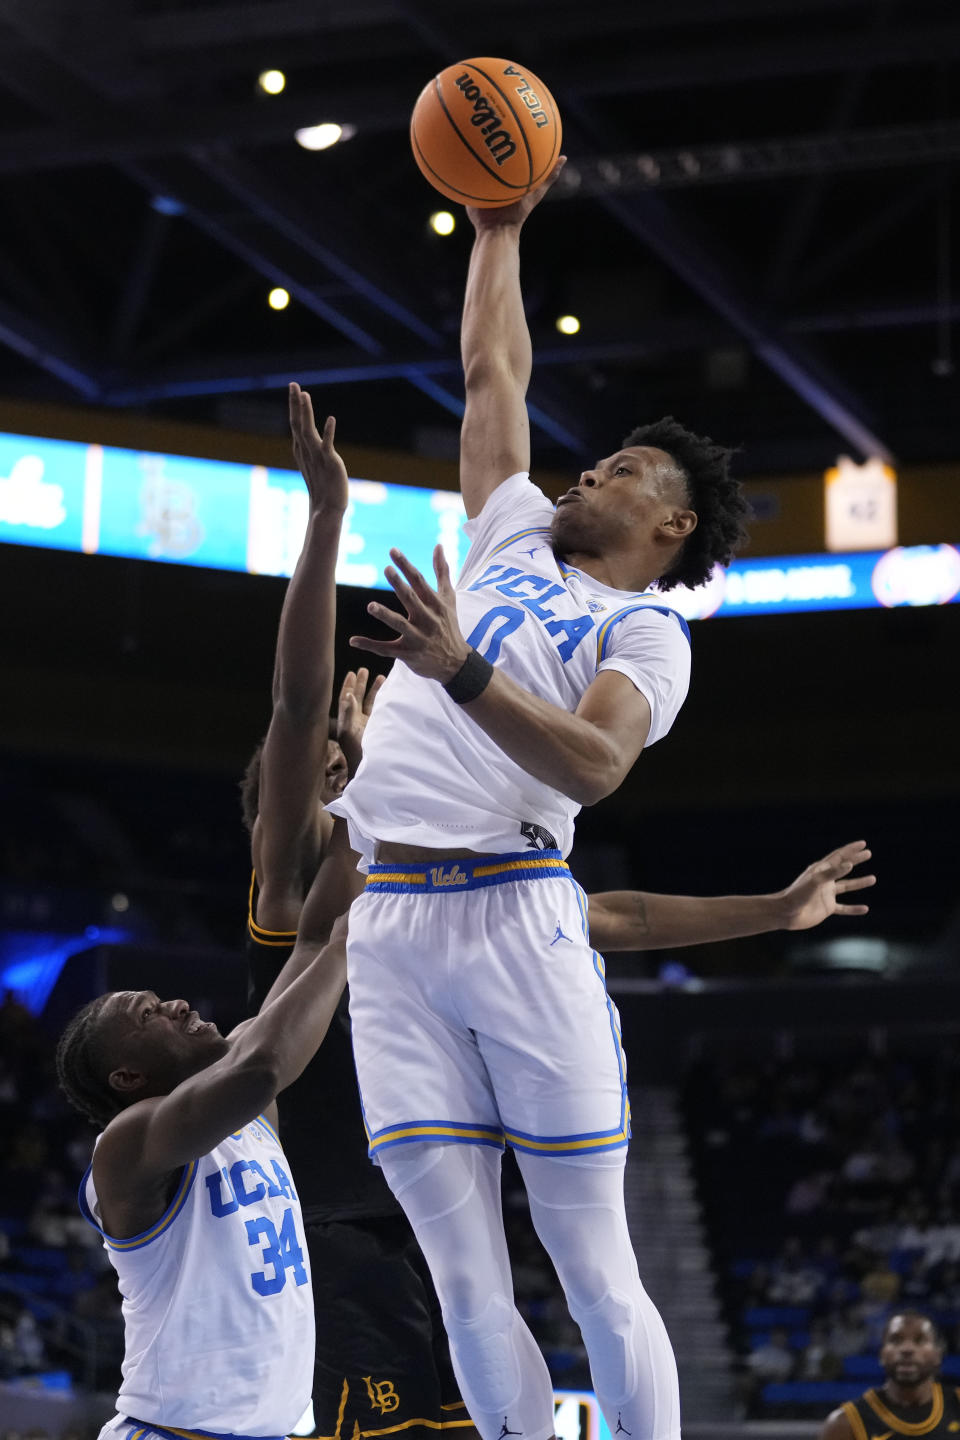 UCLA guard Jaylen Clark (0) grabs a rebound during the first half of the team's NCAA college basketball game against Long Beach State on Friday, Nov. 11, 2022, in Los Angeles. (AP Photo/Marcio Jose Sanchez)